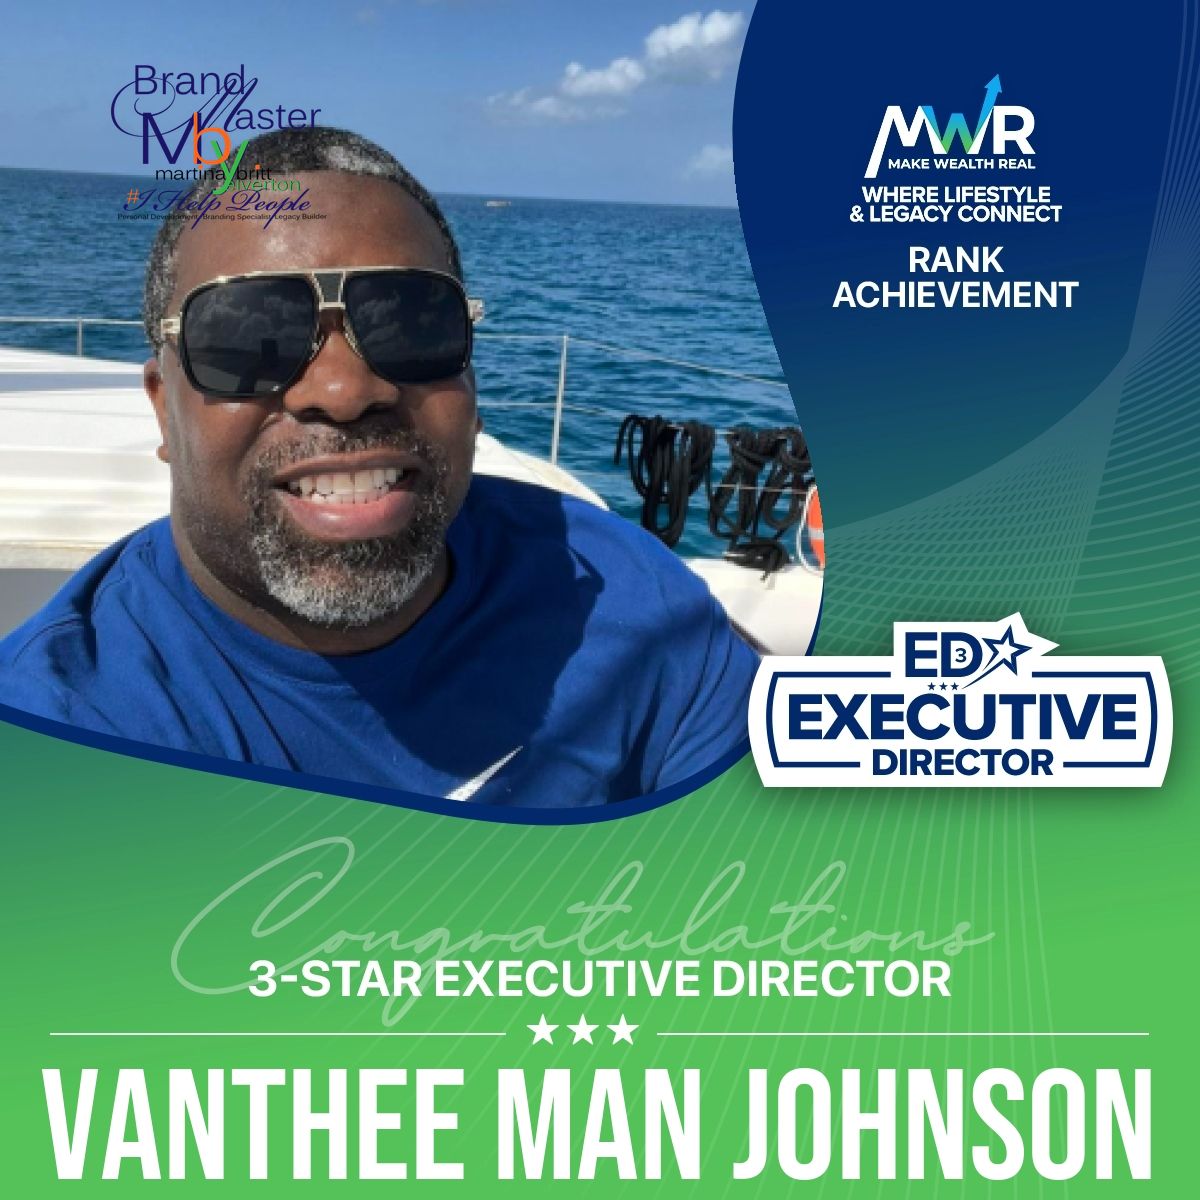 Congrats to my business partner Van Johnson for his rank achievement where he is now making no less than $50/Day which is $1500/Month in RESIDUAL income and is well on his way to $15,000/Day! #MWRMovement #Project10k  Have you taken the  #72HrMoneyChallenge yet? #AskMeHow